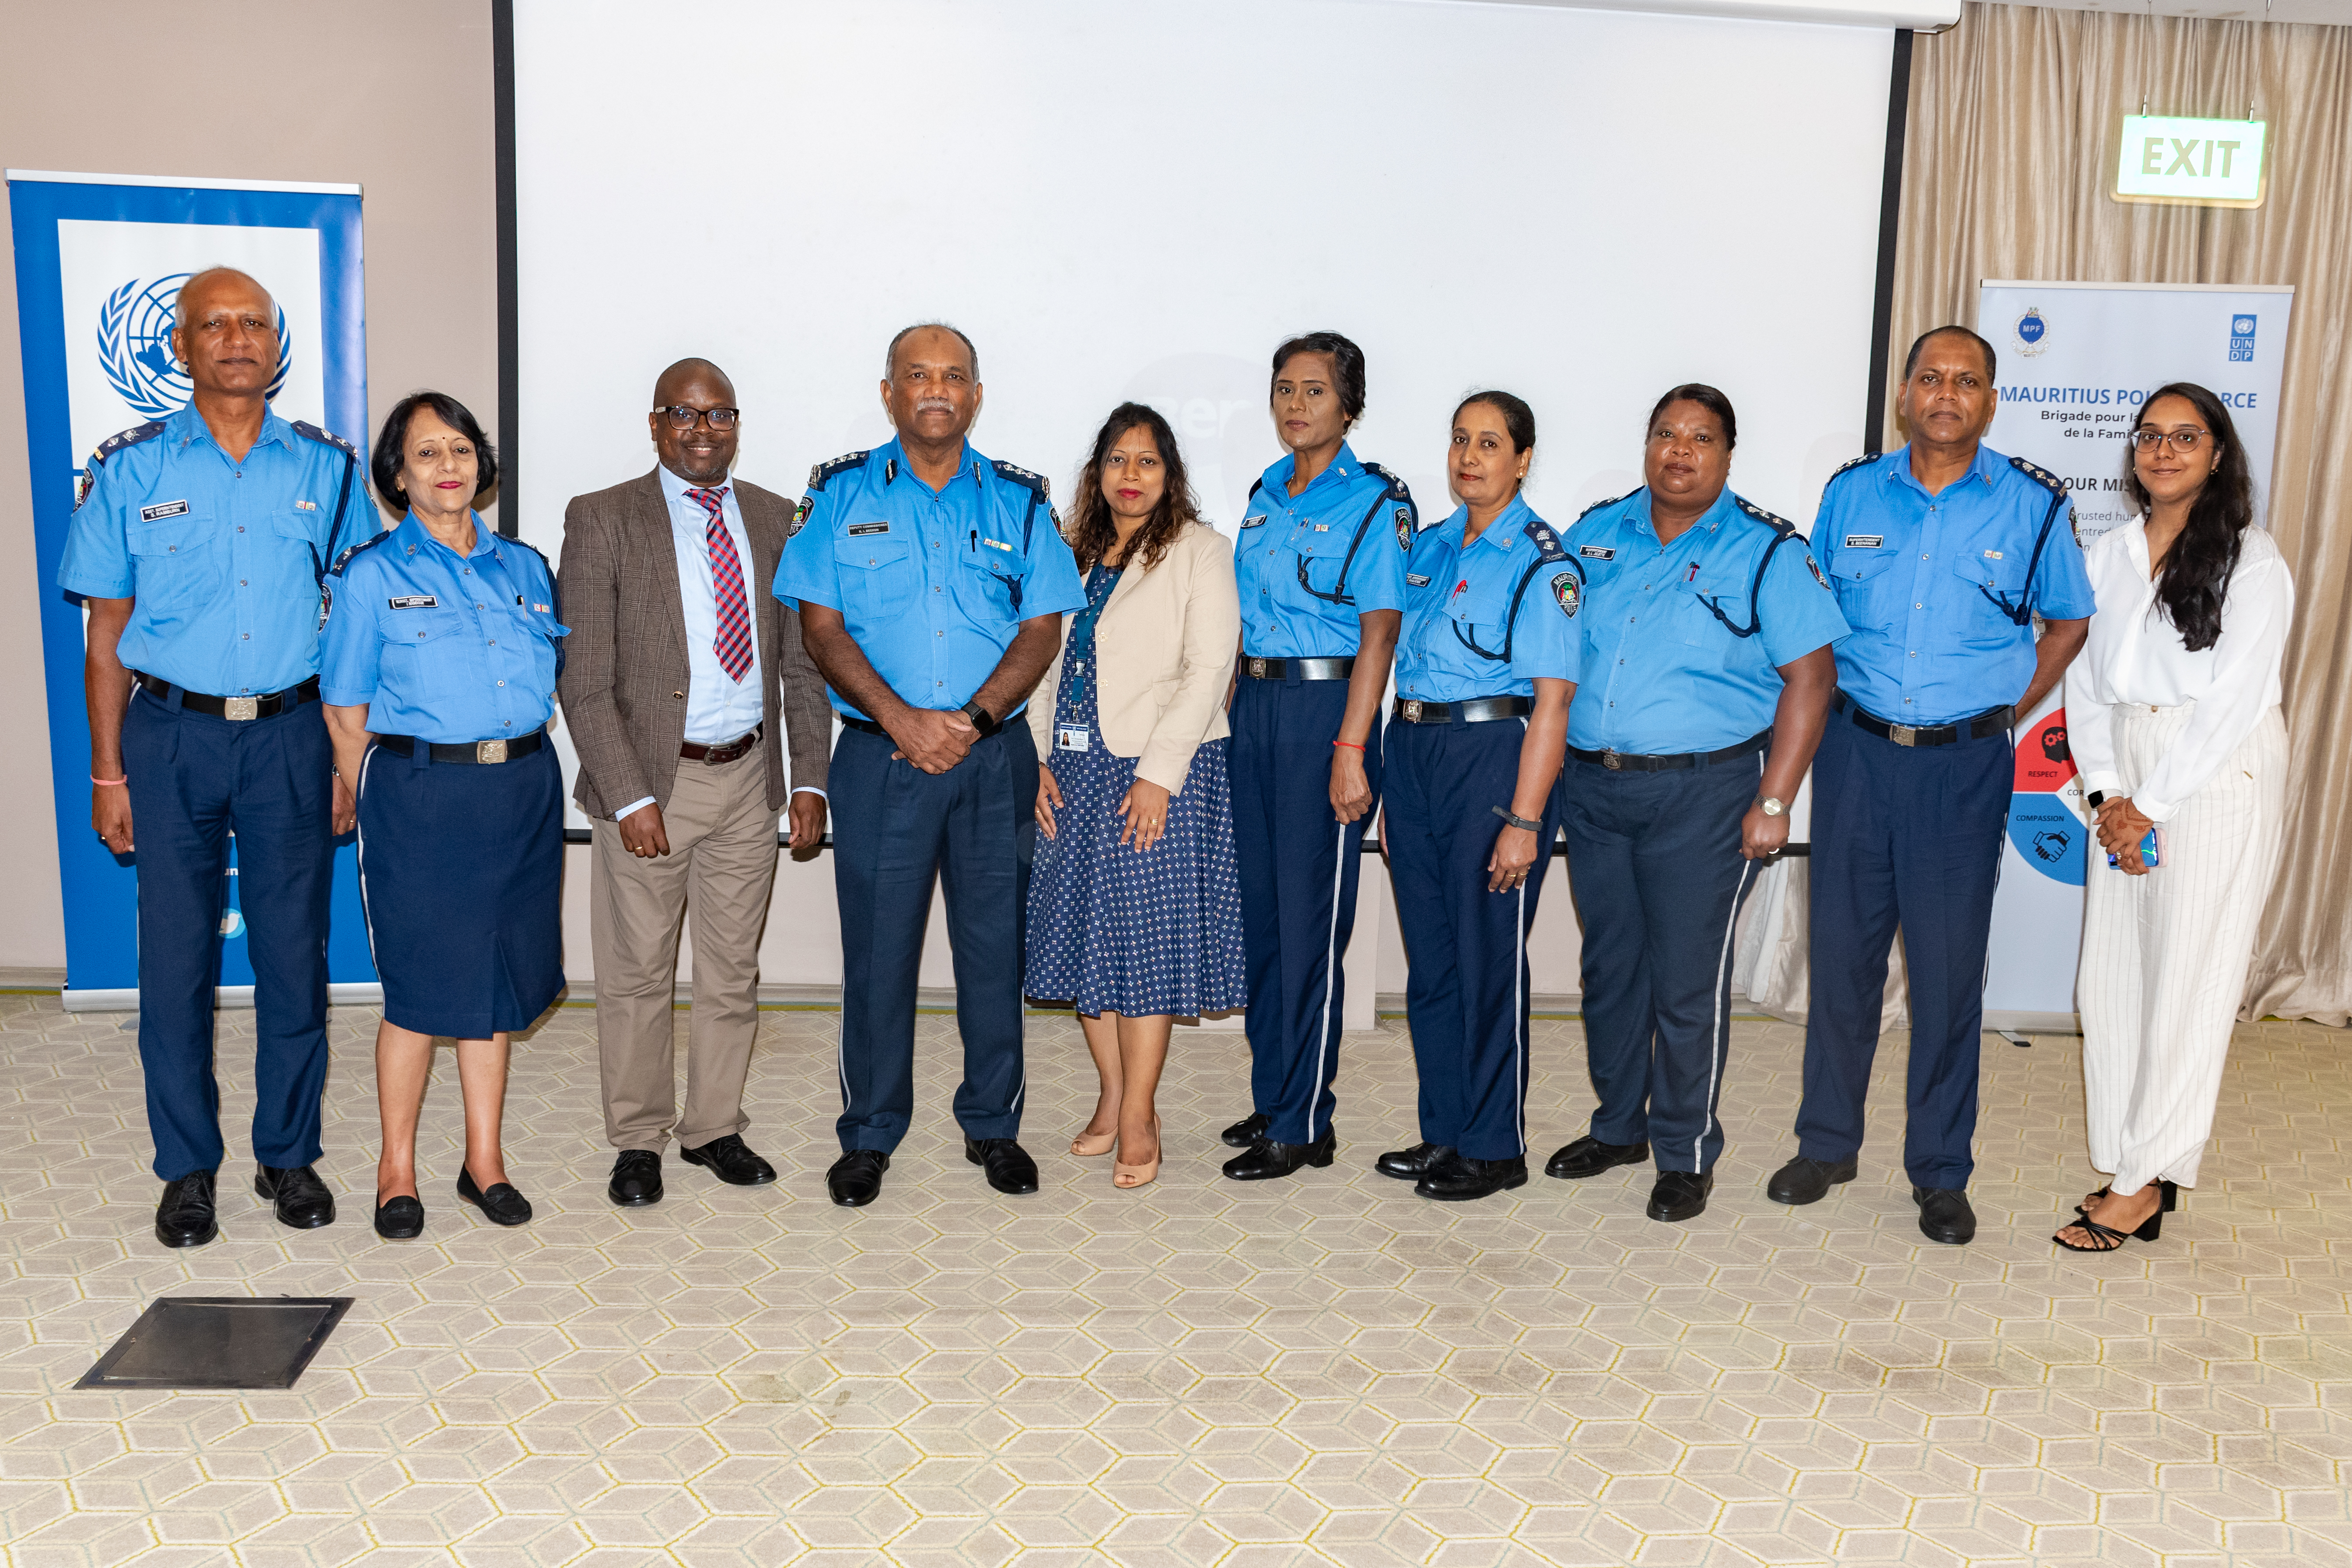 UNDP and Mauritius Police Force representatives during the launching event of a 2-day workshop to train 75 women police officers on GBV